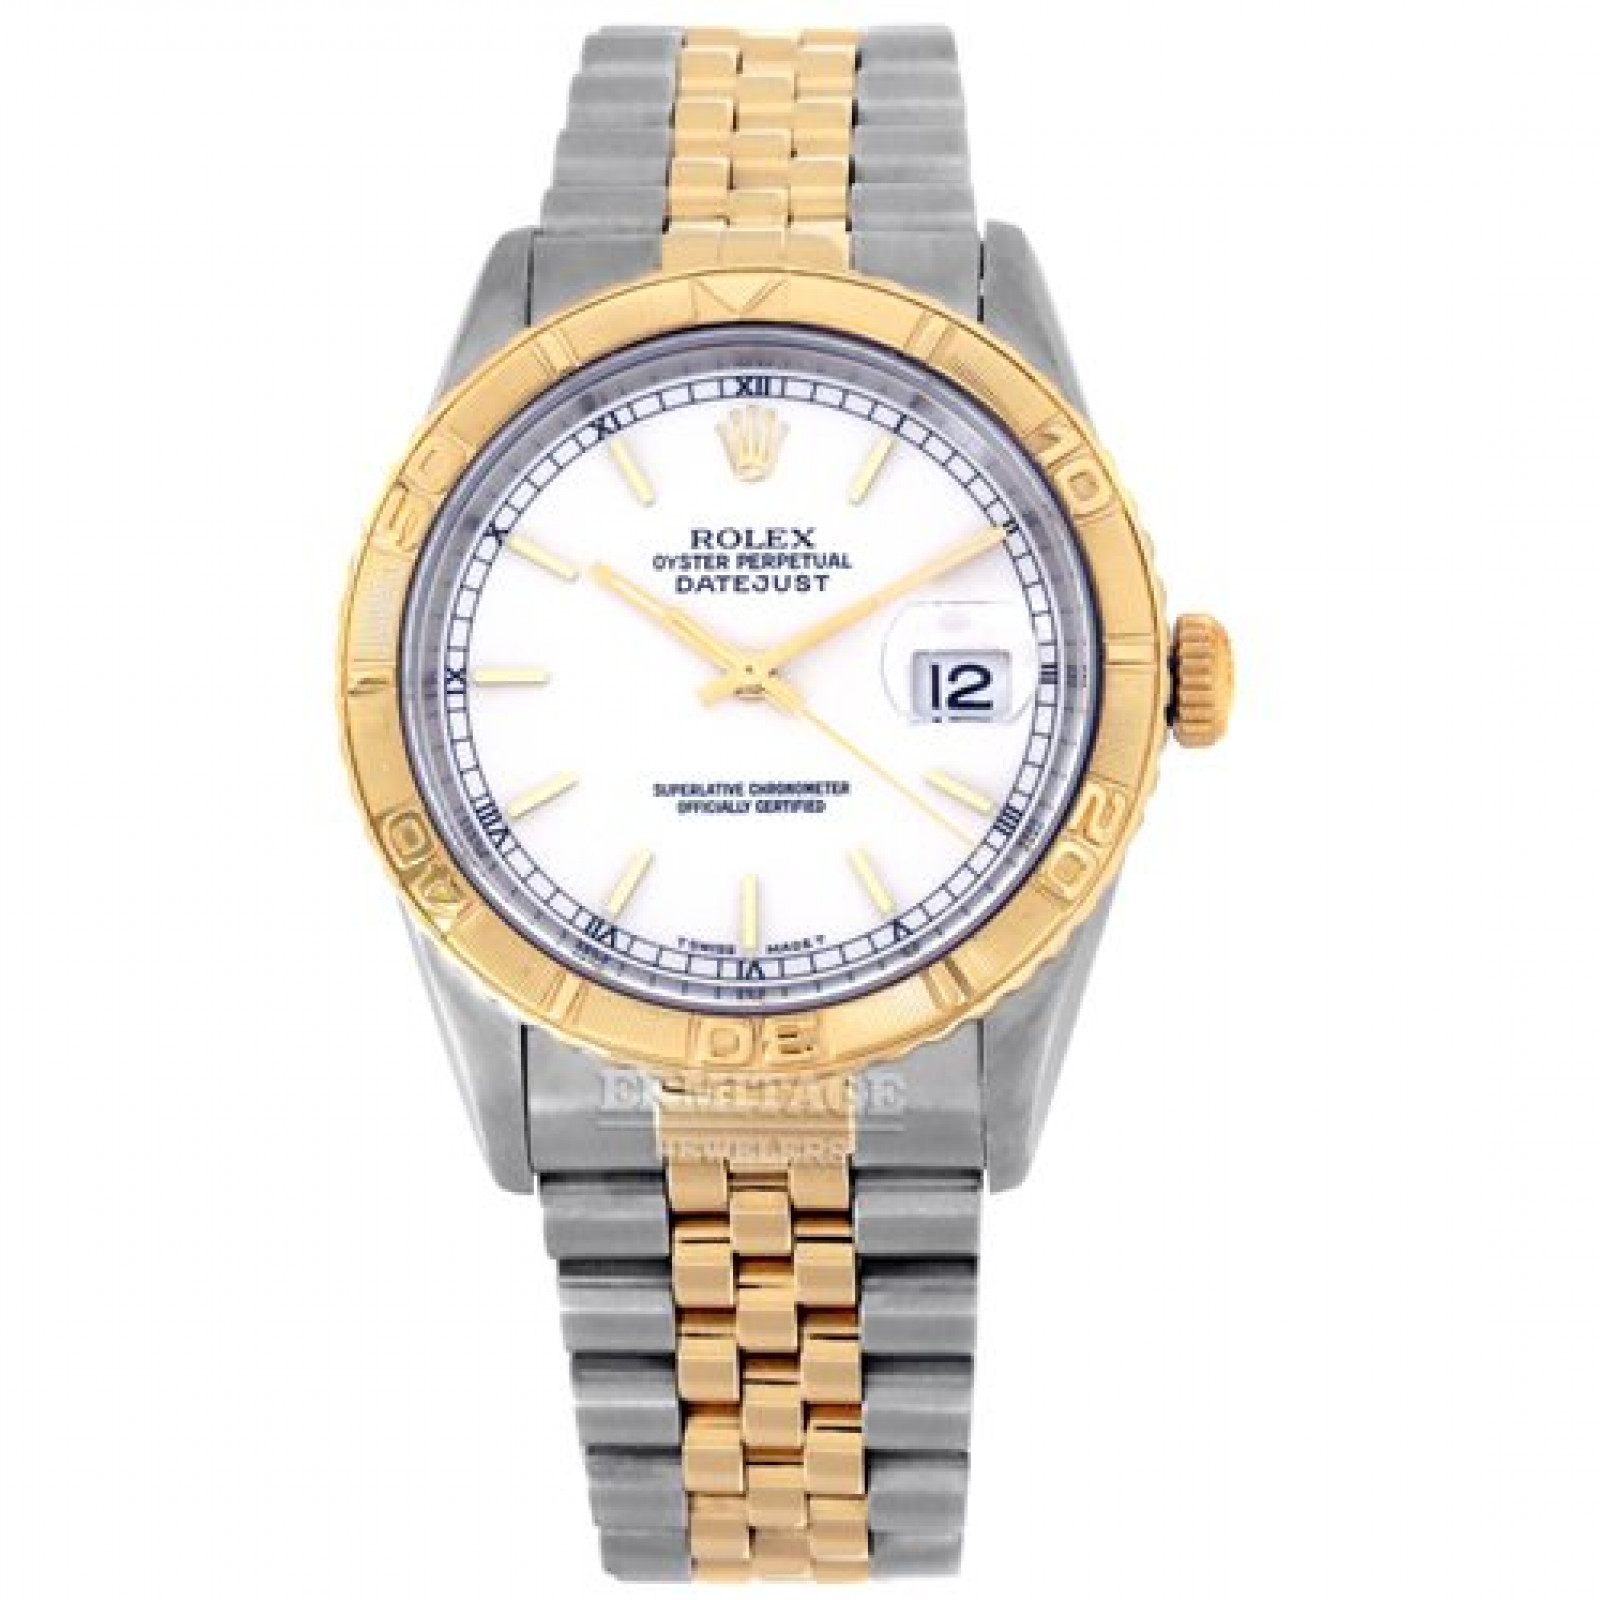 Rolex Oyster Perpetual Datejust Turn-O-Graph 16263 Gold